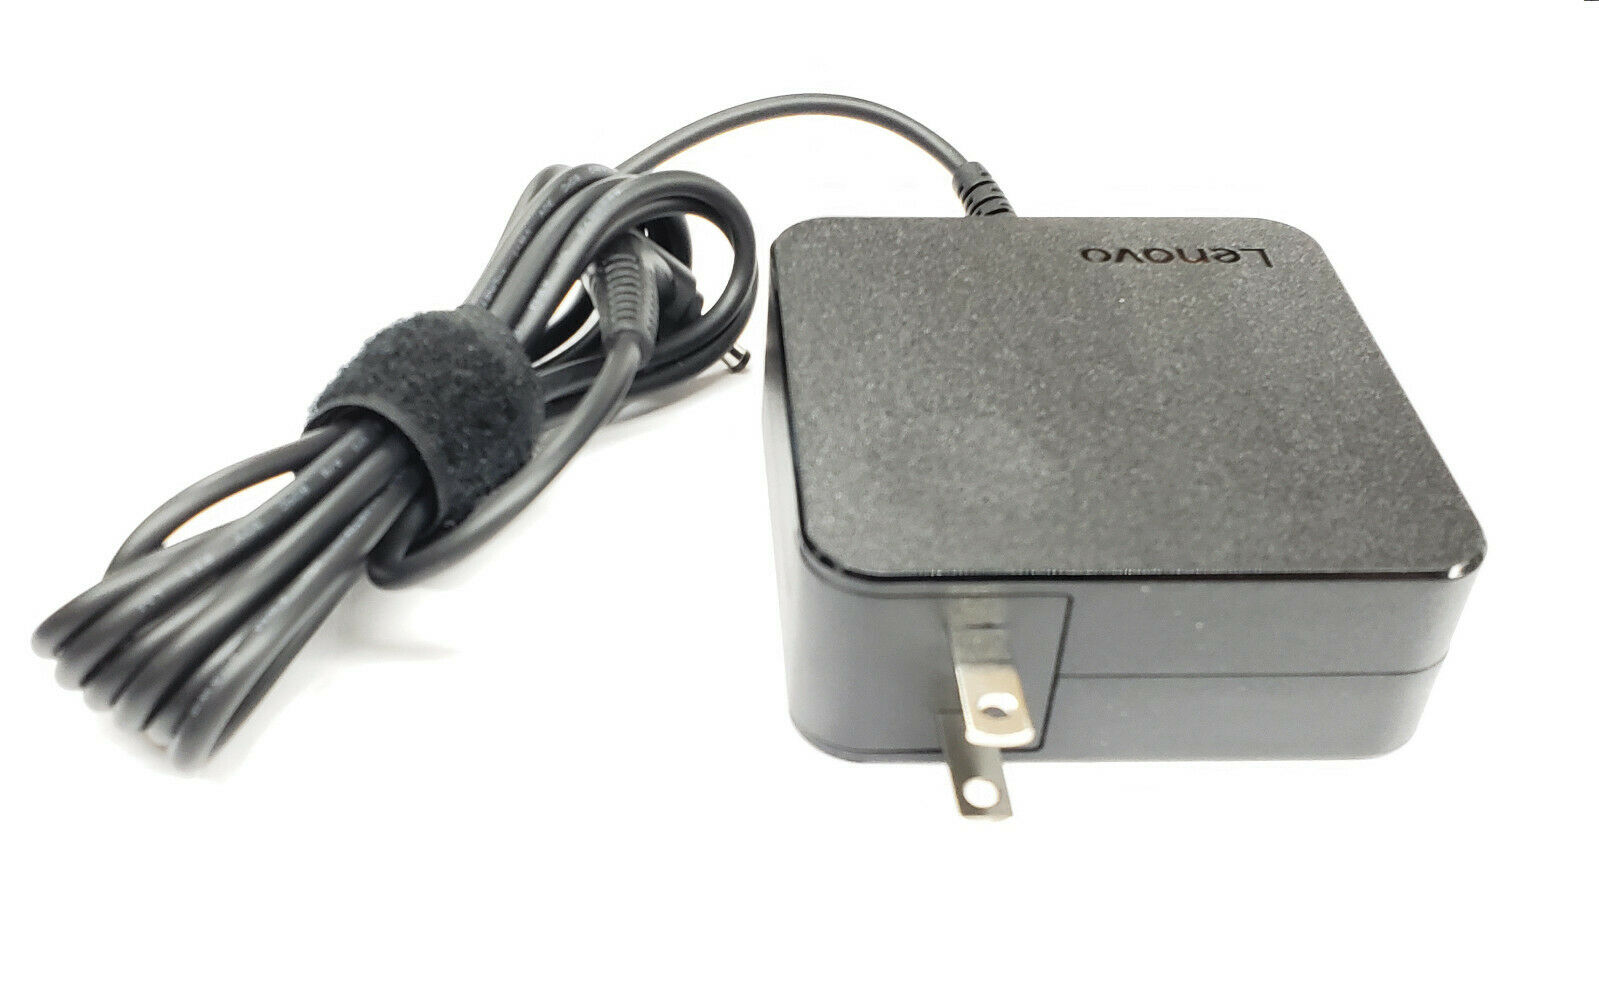 New Genuine Lenovo 65W AC Power Laptop Charger Adapter IdeaPad S340 81N8005DUS Country/Region of Manufacture: China C